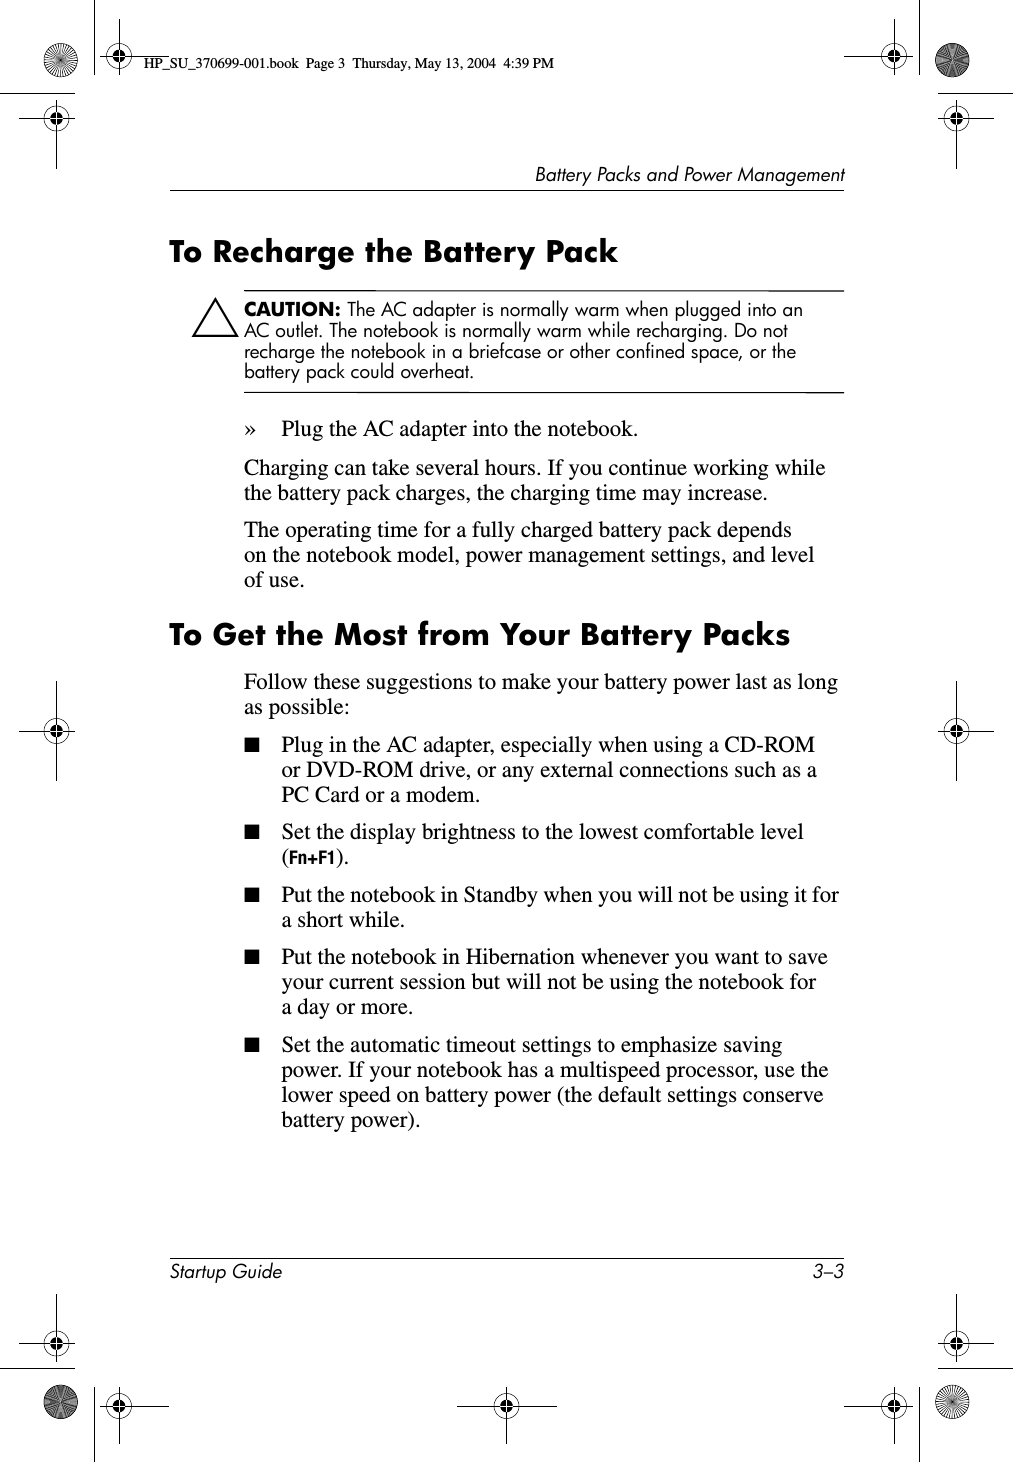 Battery Packs and Power ManagementStartup Guide 3–3To Recharge the Battery PackÄCAUTION: The AC adapter is normally warm when plugged into an AC outlet. The notebook is normally warm while recharging. Do not recharge the notebook in a briefcase or other confined space, or the battery pack could overheat.»Plug the AC adapter into the notebook. Charging can take several hours. If you continue working while the battery pack charges, the charging time may increase.The operating time for a fully charged battery pack depends on the notebook model, power management settings, and level of use.To Get the Most from Your Battery PacksFollow these suggestions to make your battery power last as long as possible:■Plug in the AC adapter, especially when using a CD-ROM or DVD-ROM drive, or any external connections such as a PC Card or a modem.■Set the display brightness to the lowest comfortable level (Fn+F1). ■Put the notebook in Standby when you will not be using it for a short while. ■Put the notebook in Hibernation whenever you want to save your current session but will not be using the notebook for a day or more.■Set the automatic timeout settings to emphasize saving power. If your notebook has a multispeed processor, use the lower speed on battery power (the default settings conserve battery power). HP_SU_370699-001.book  Page 3  Thursday, May 13, 2004  4:39 PM